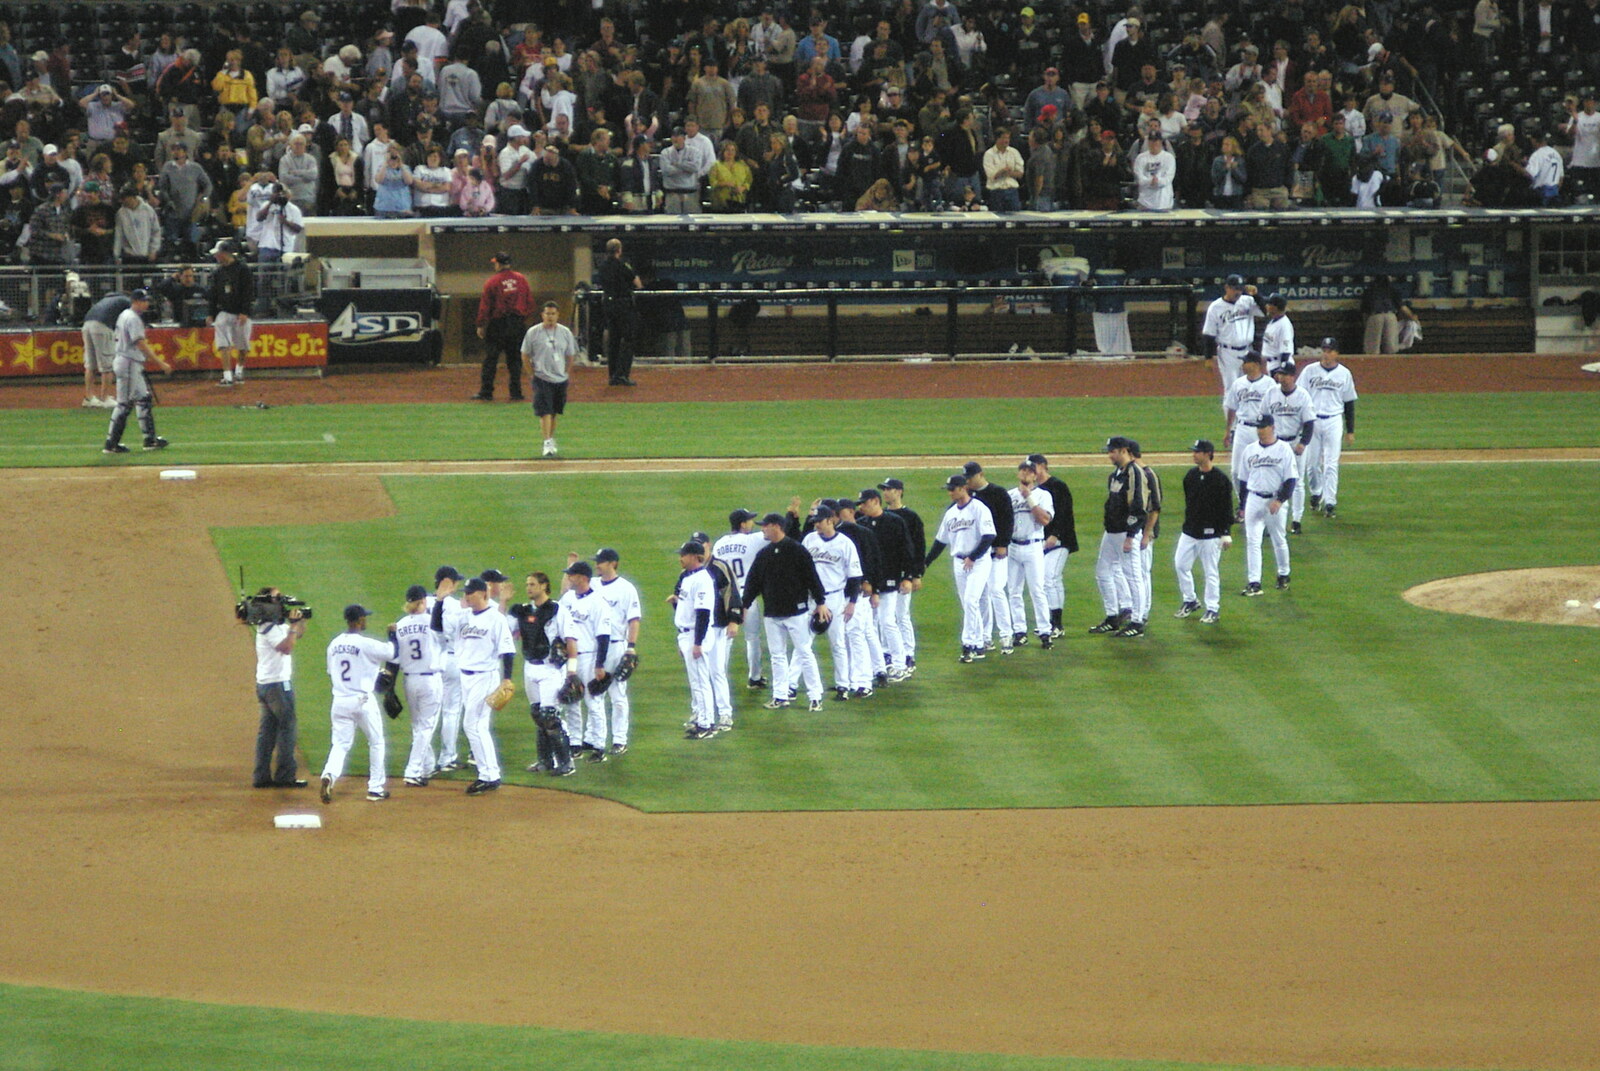 The teams shake hands from The Padres at Petco Park: a Baseball Game, San Diego, California - 31st May 2005